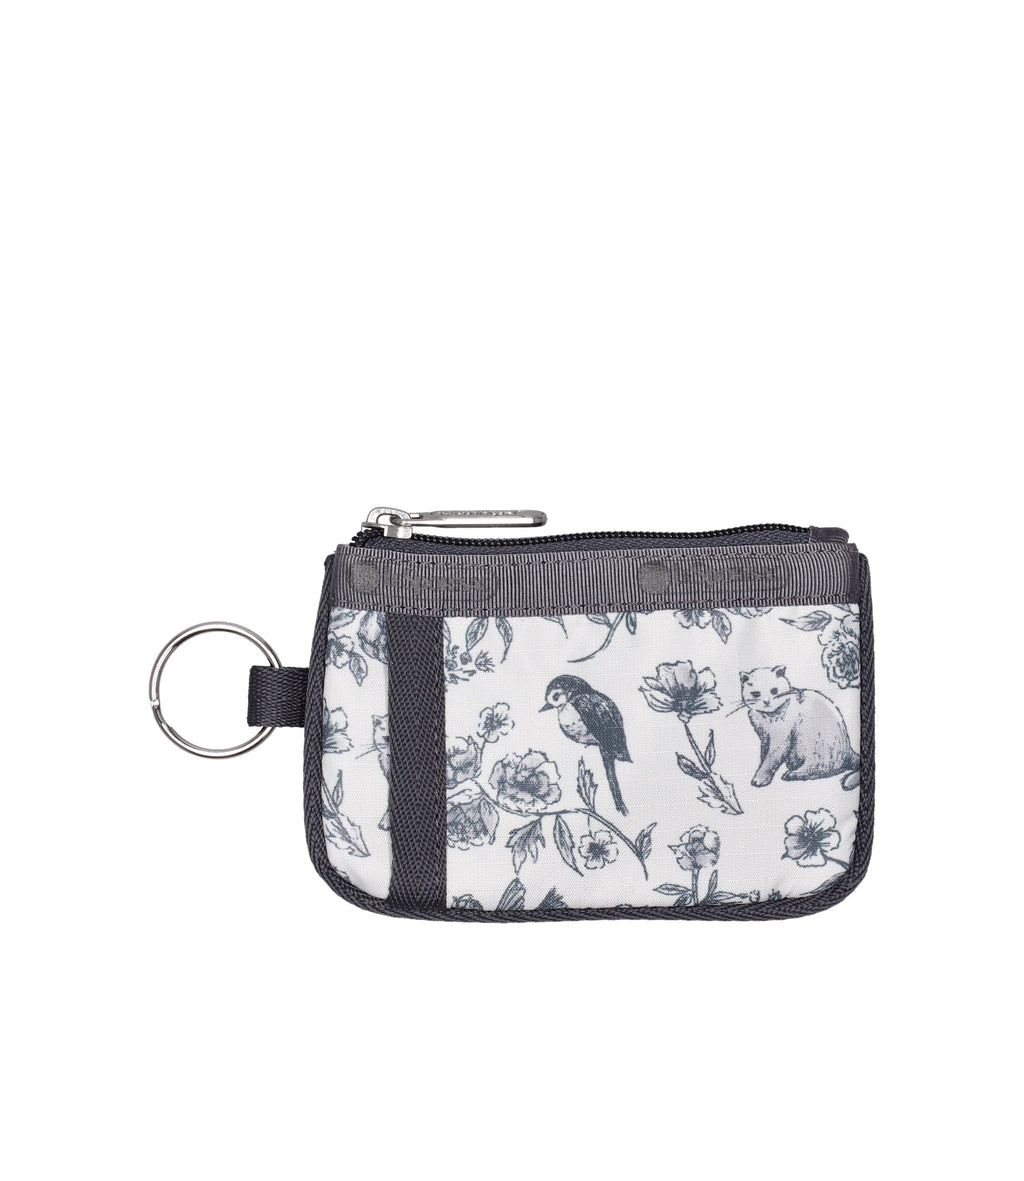 Key Card Holder - Floral Birds and Cats print – LeSportsac